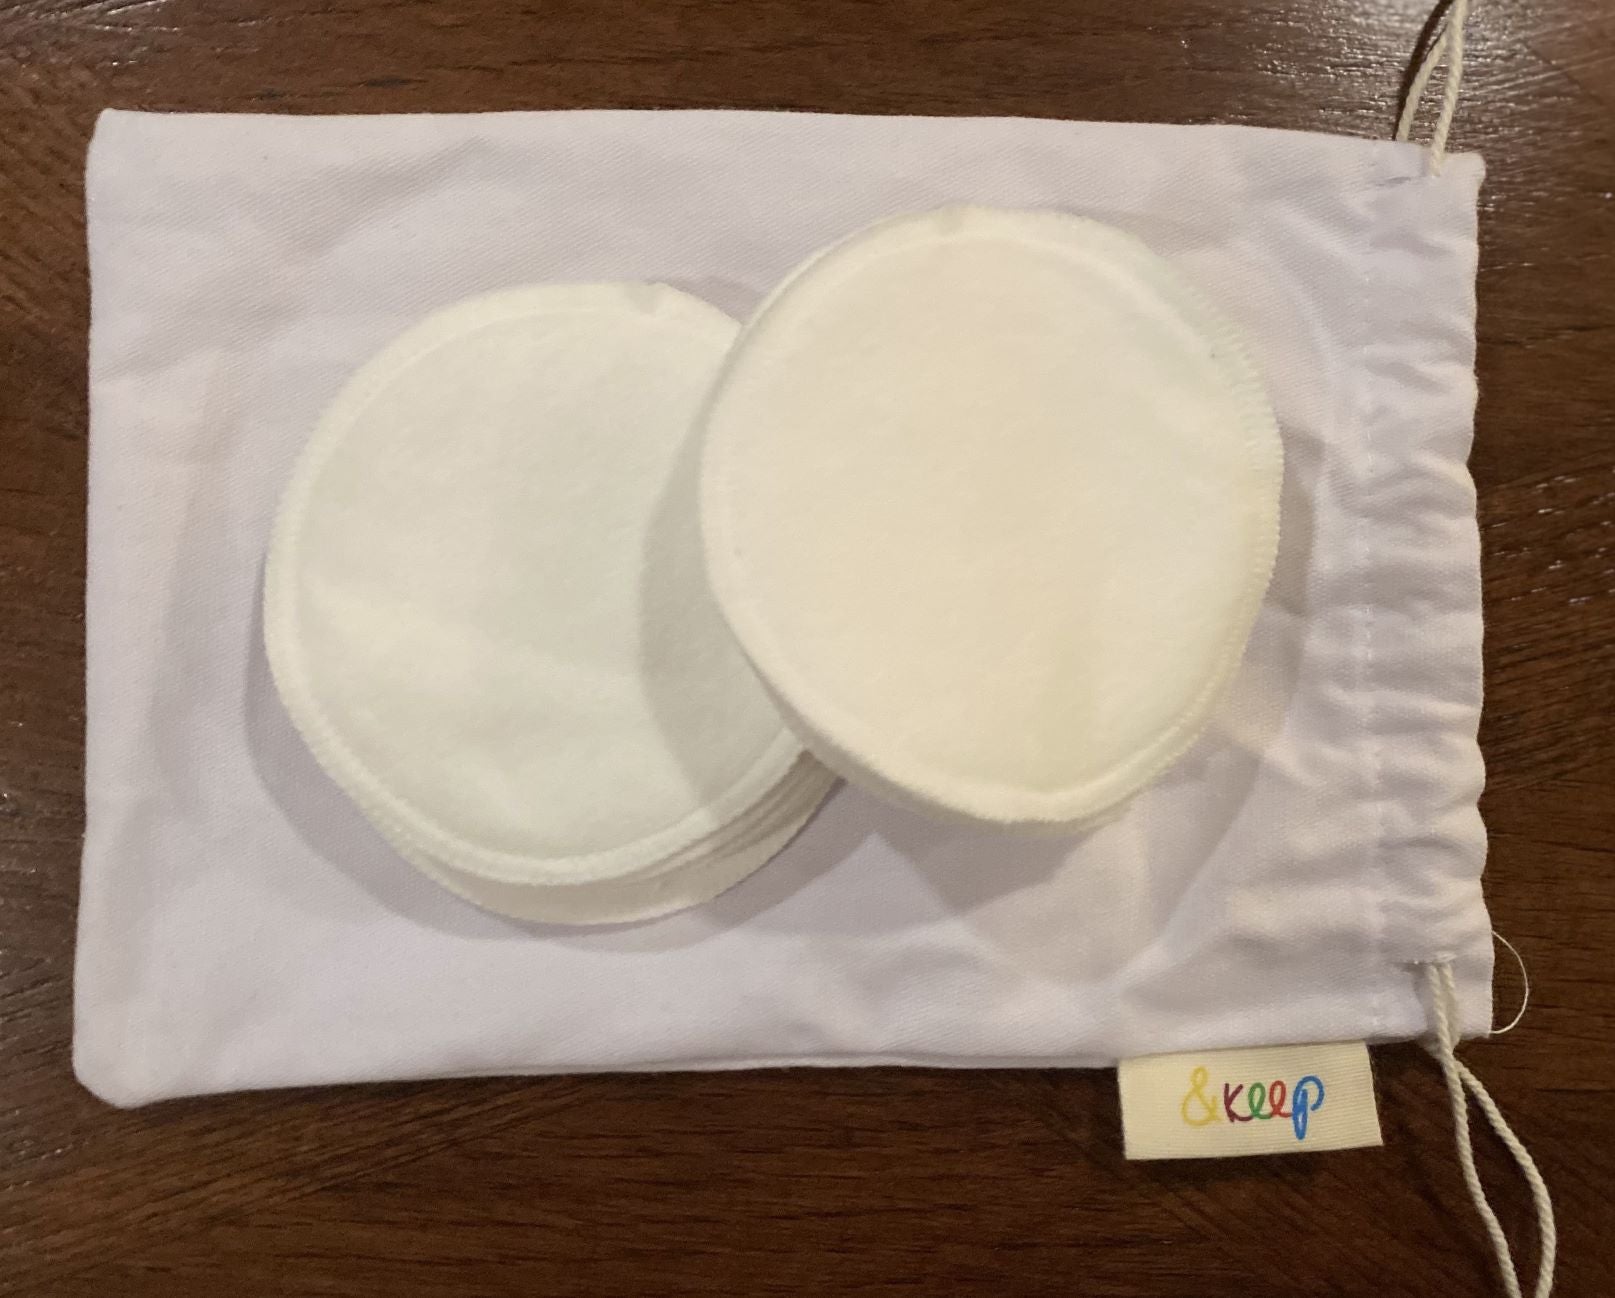 10 Reusable Soft Bamboo & Cotton Make-Up Pads in Cotton with Cotton Storage Bag, Eco-Friendly Product, Plastic-Free